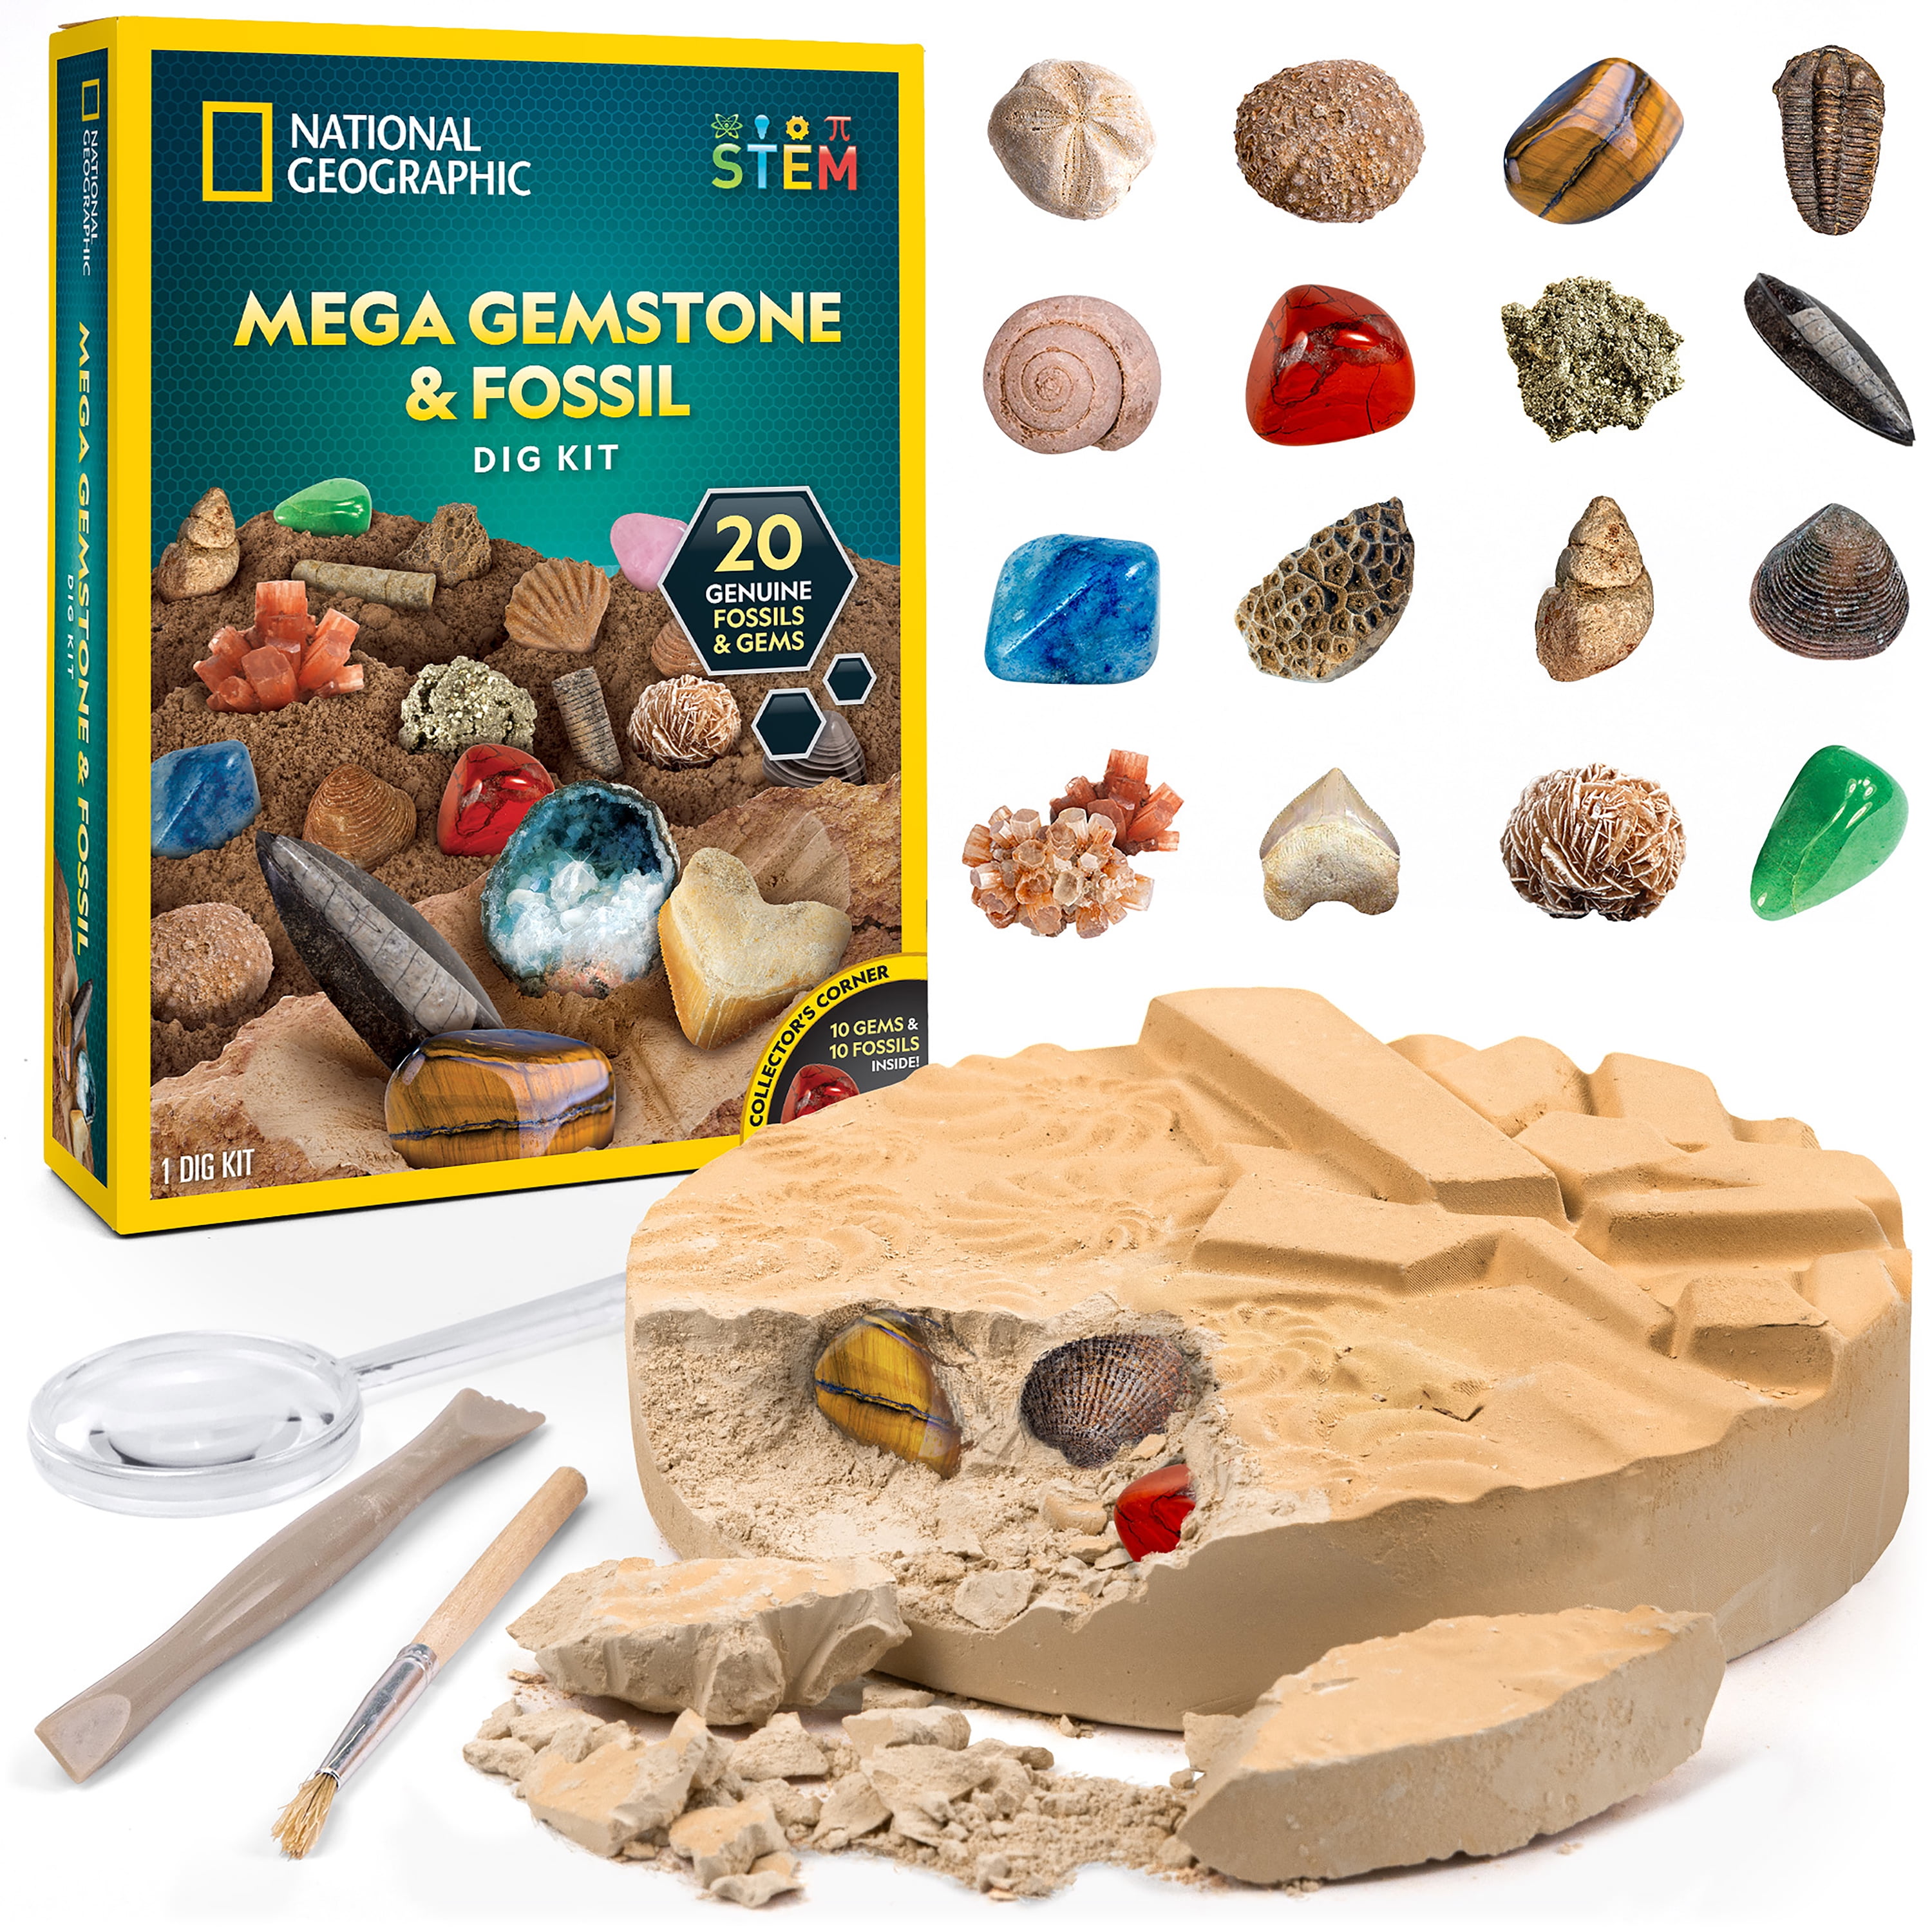 National Geographic Super Gemstone Dig Kit - Excavation Gem Kit with 10 Real Gemstones for Kids, Discover Gems with Dig Tools & Magnifying Glass, Scie